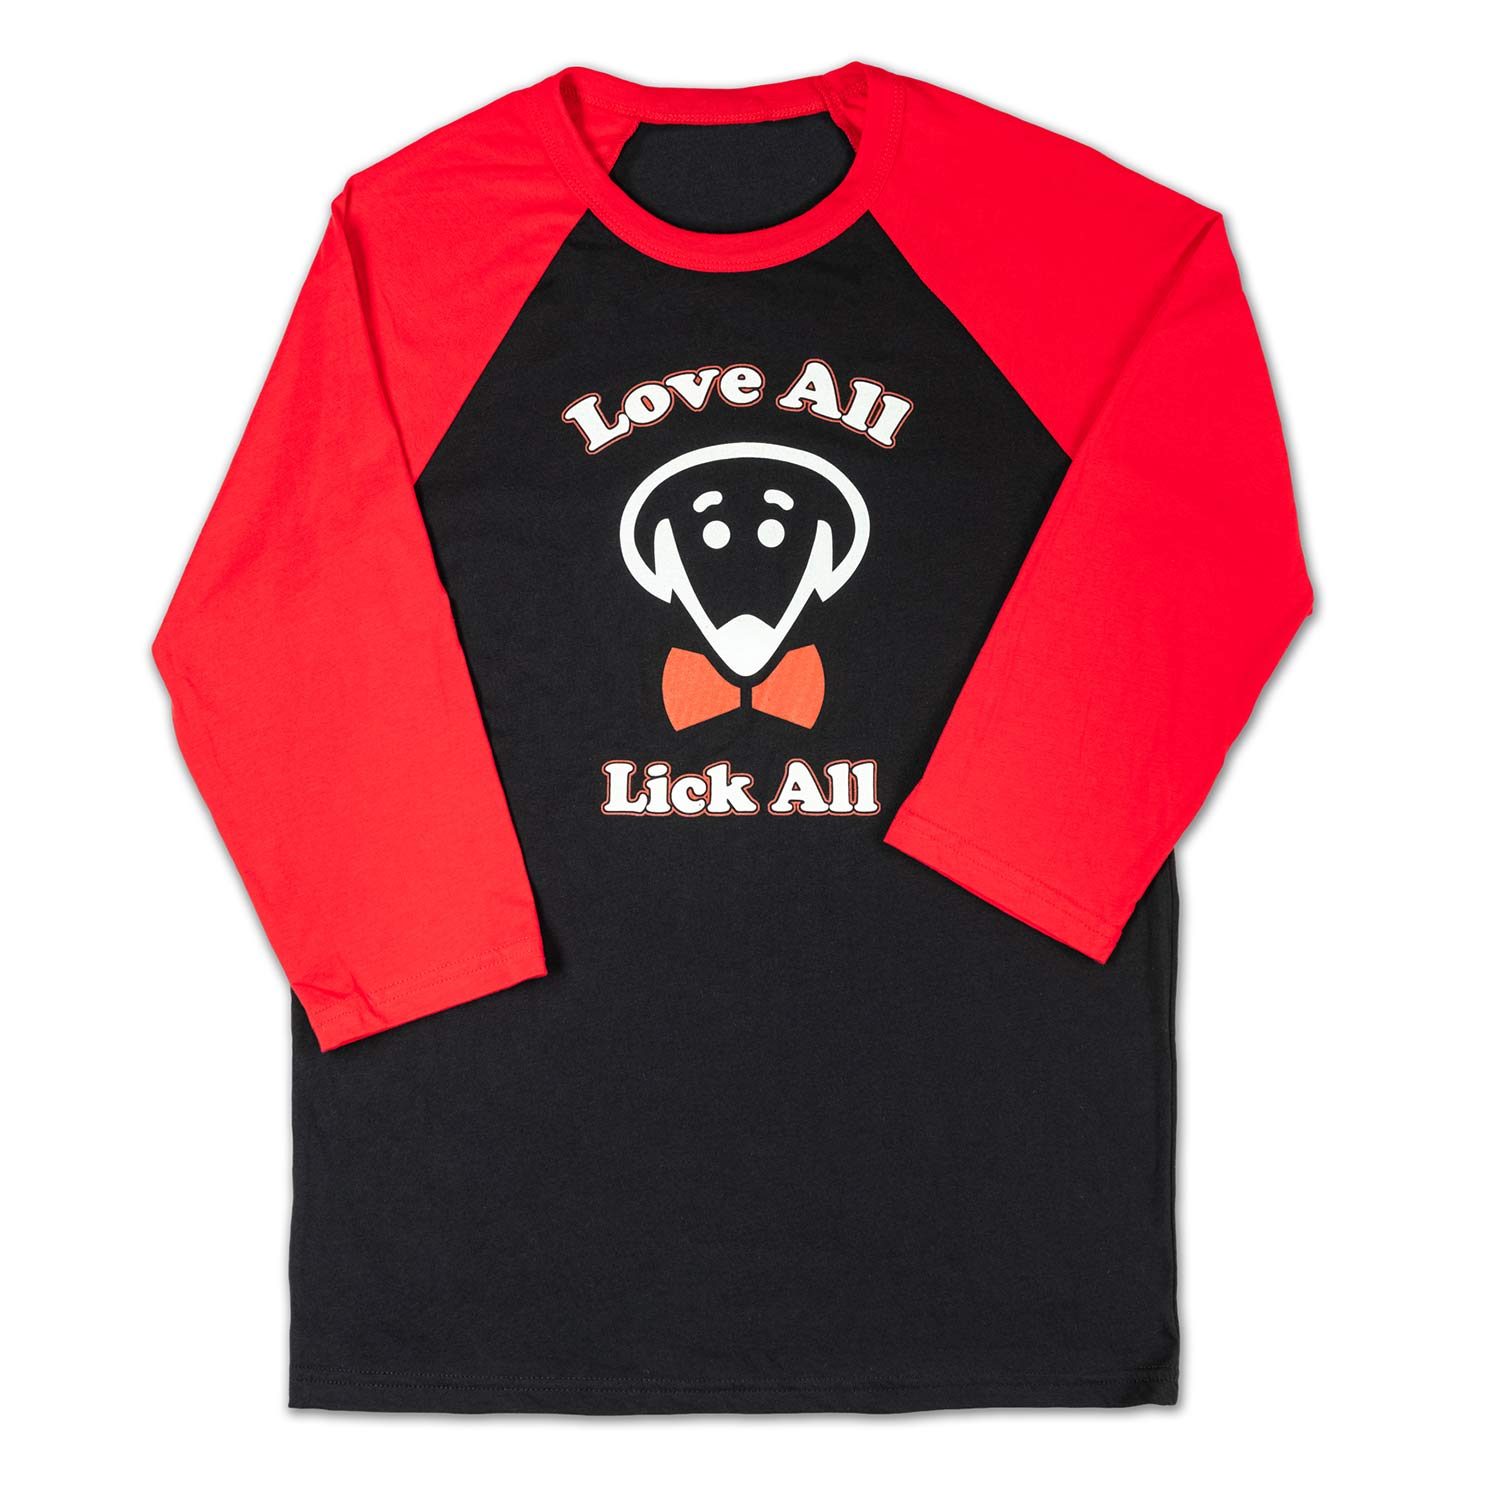 Beau Tyler Love All Lick All shirt in black